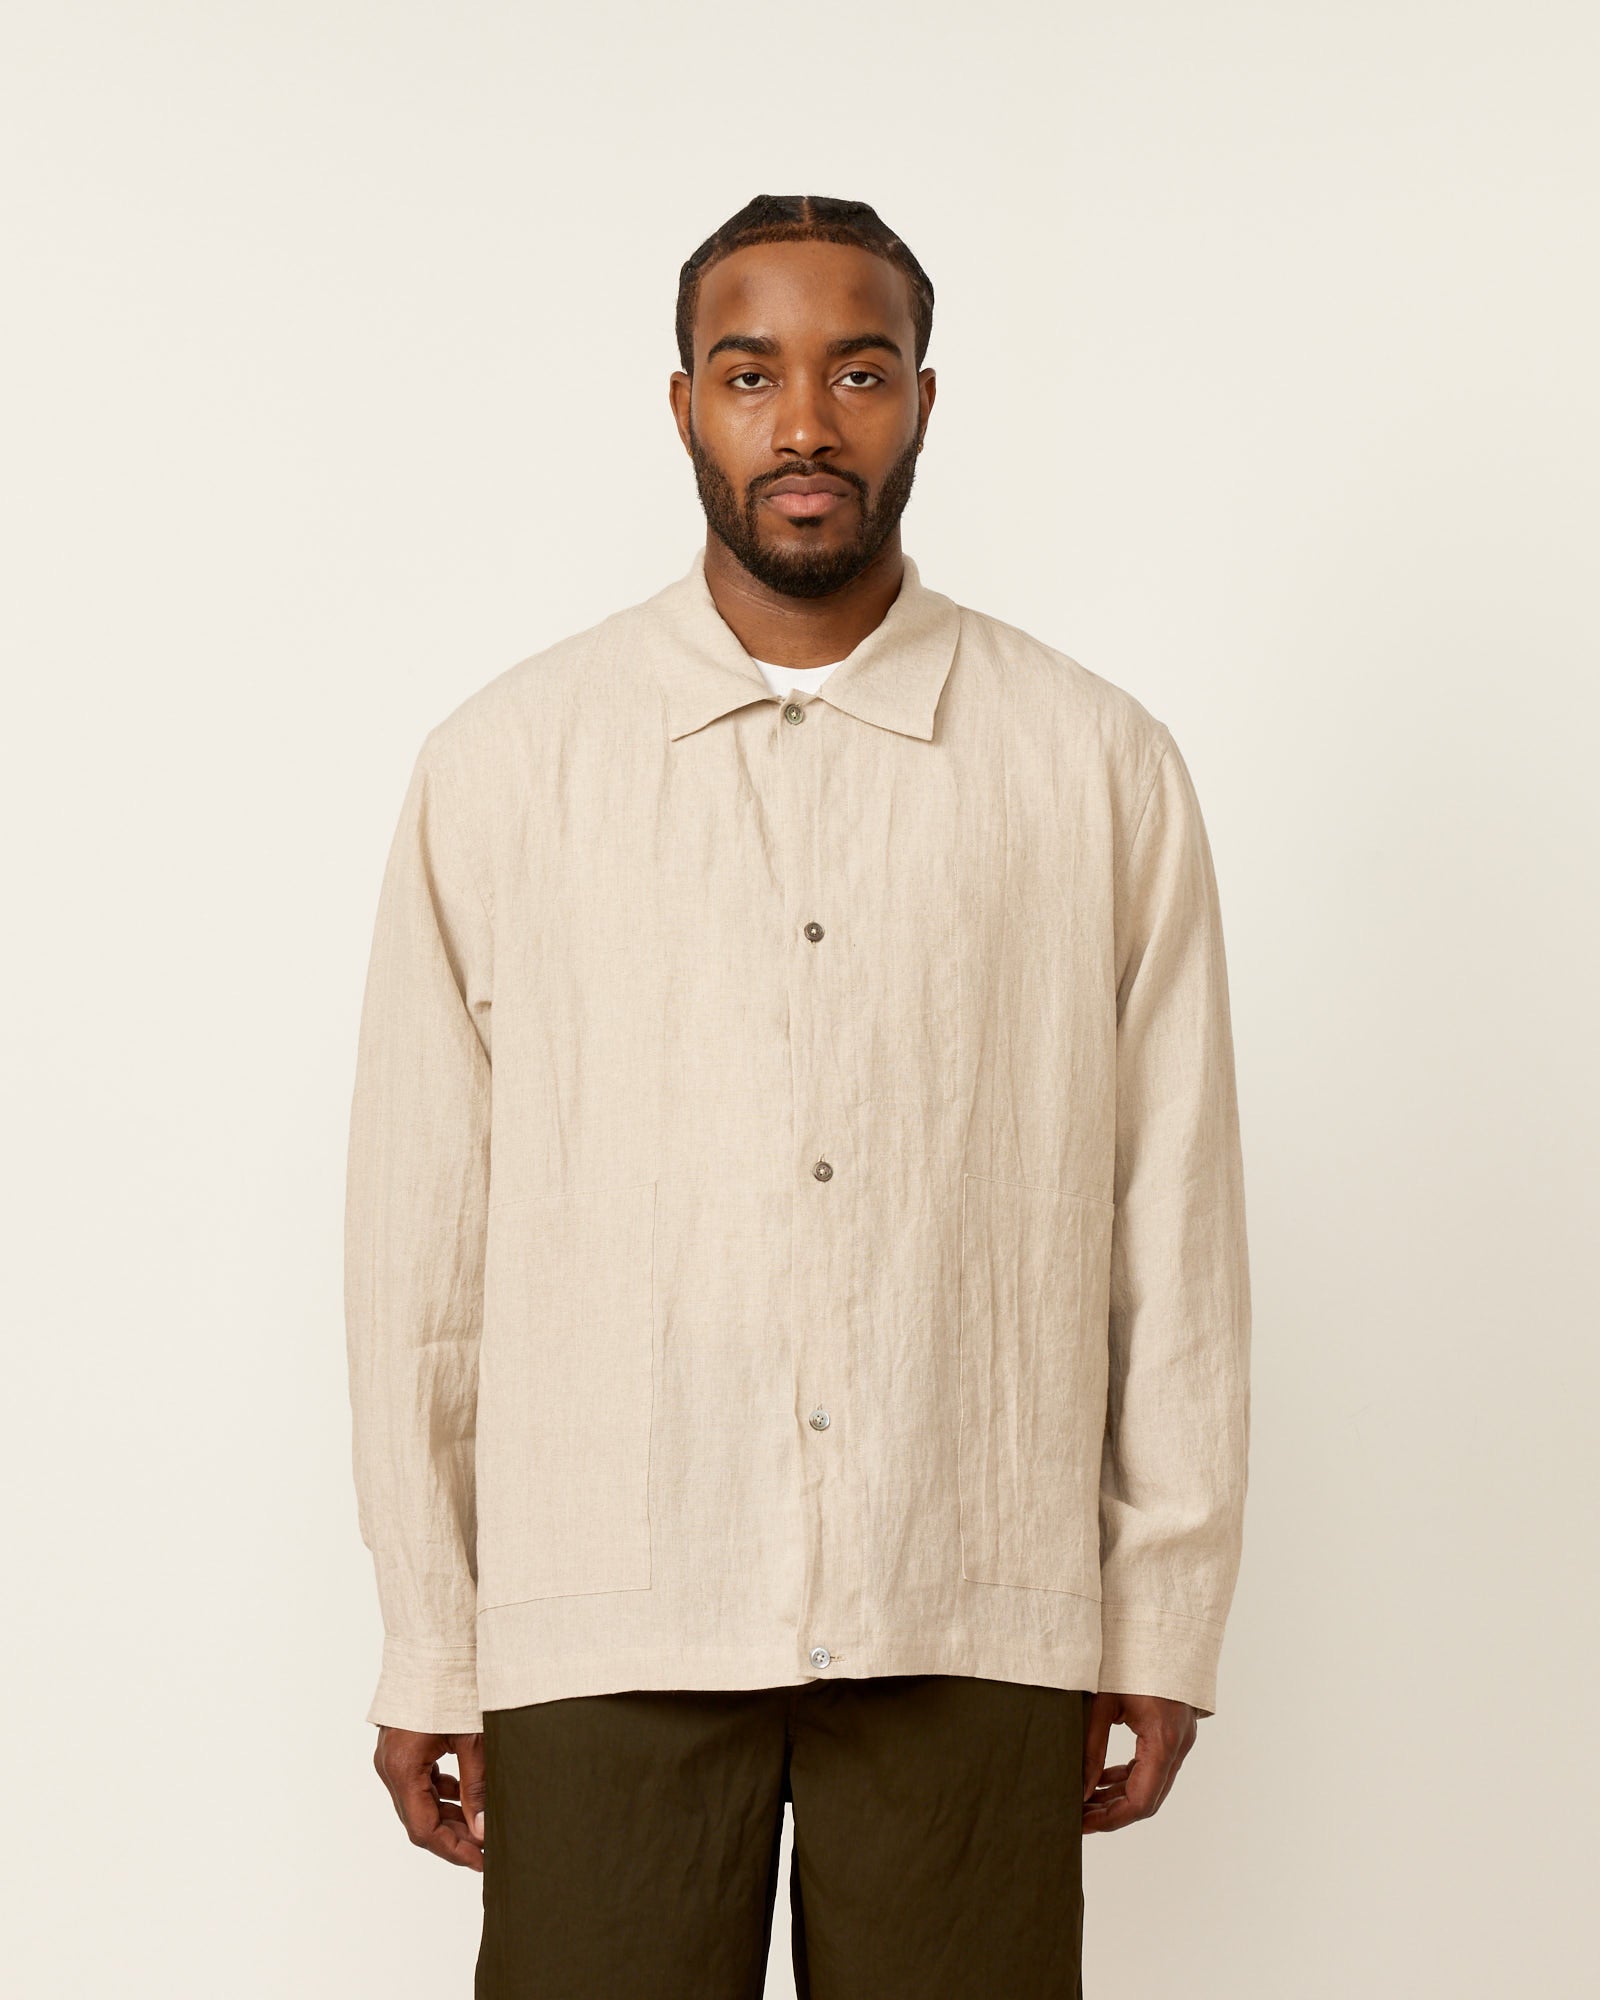 Paper Mixed Shirt Jacket in Oatmeal